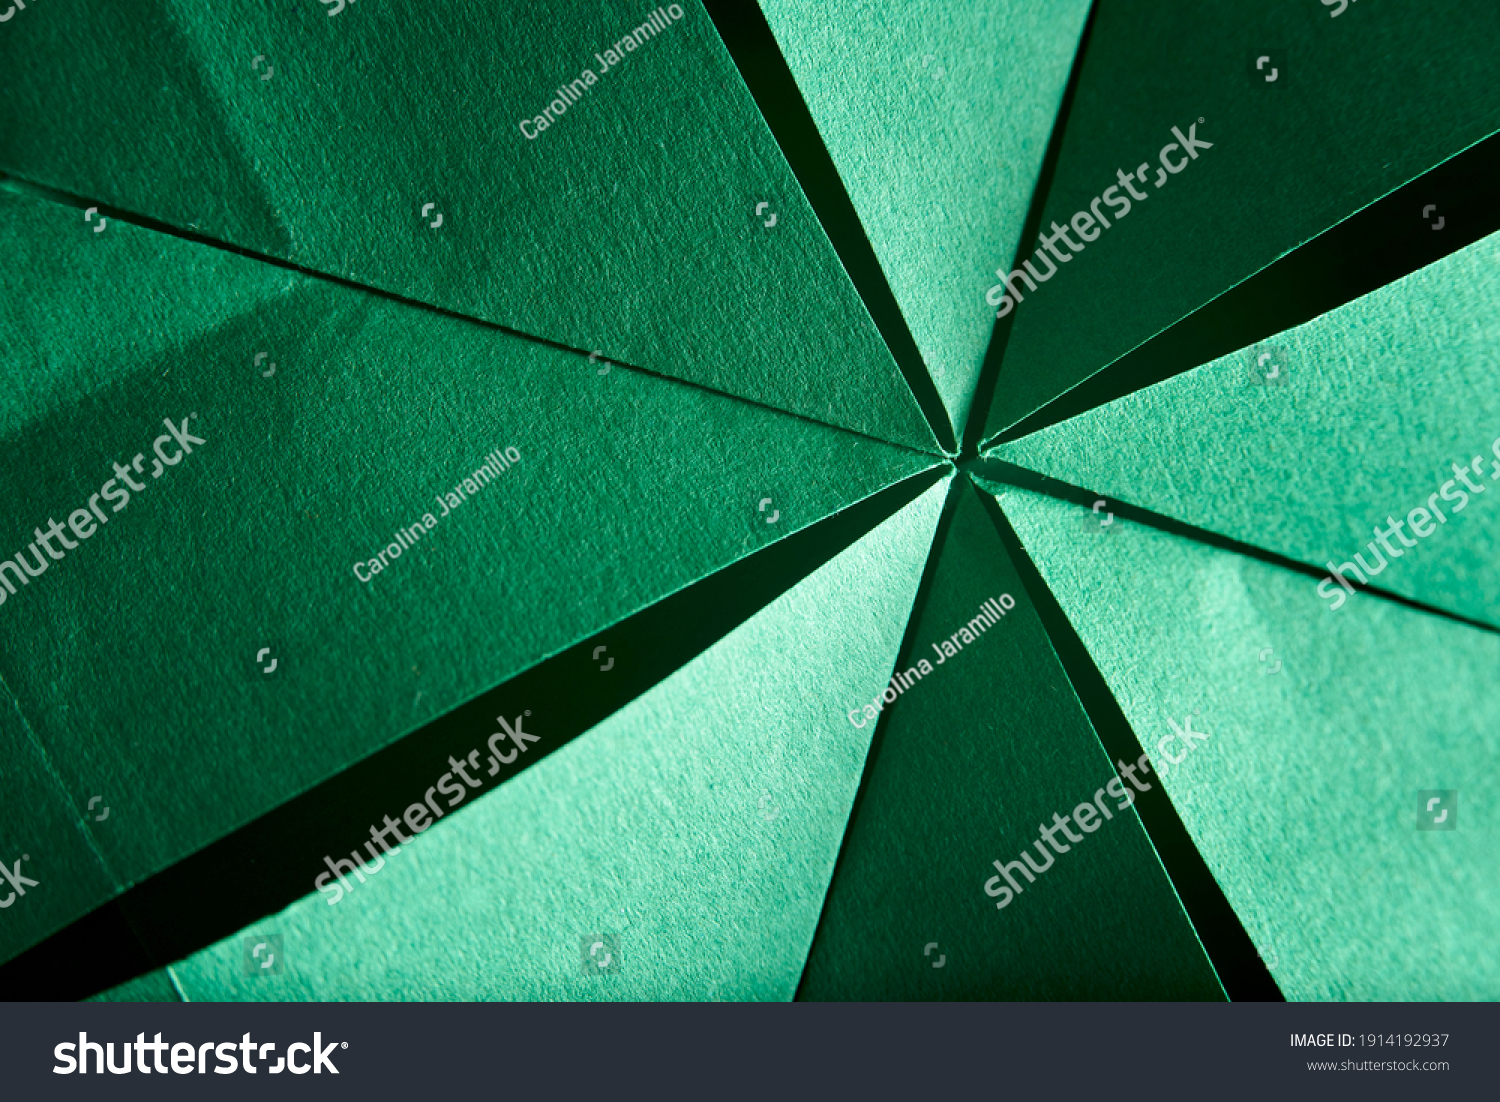 Abstract radial green background of folded textured paper. Close-up image. Concepts: origami, color, lines and geometry. #1914192937